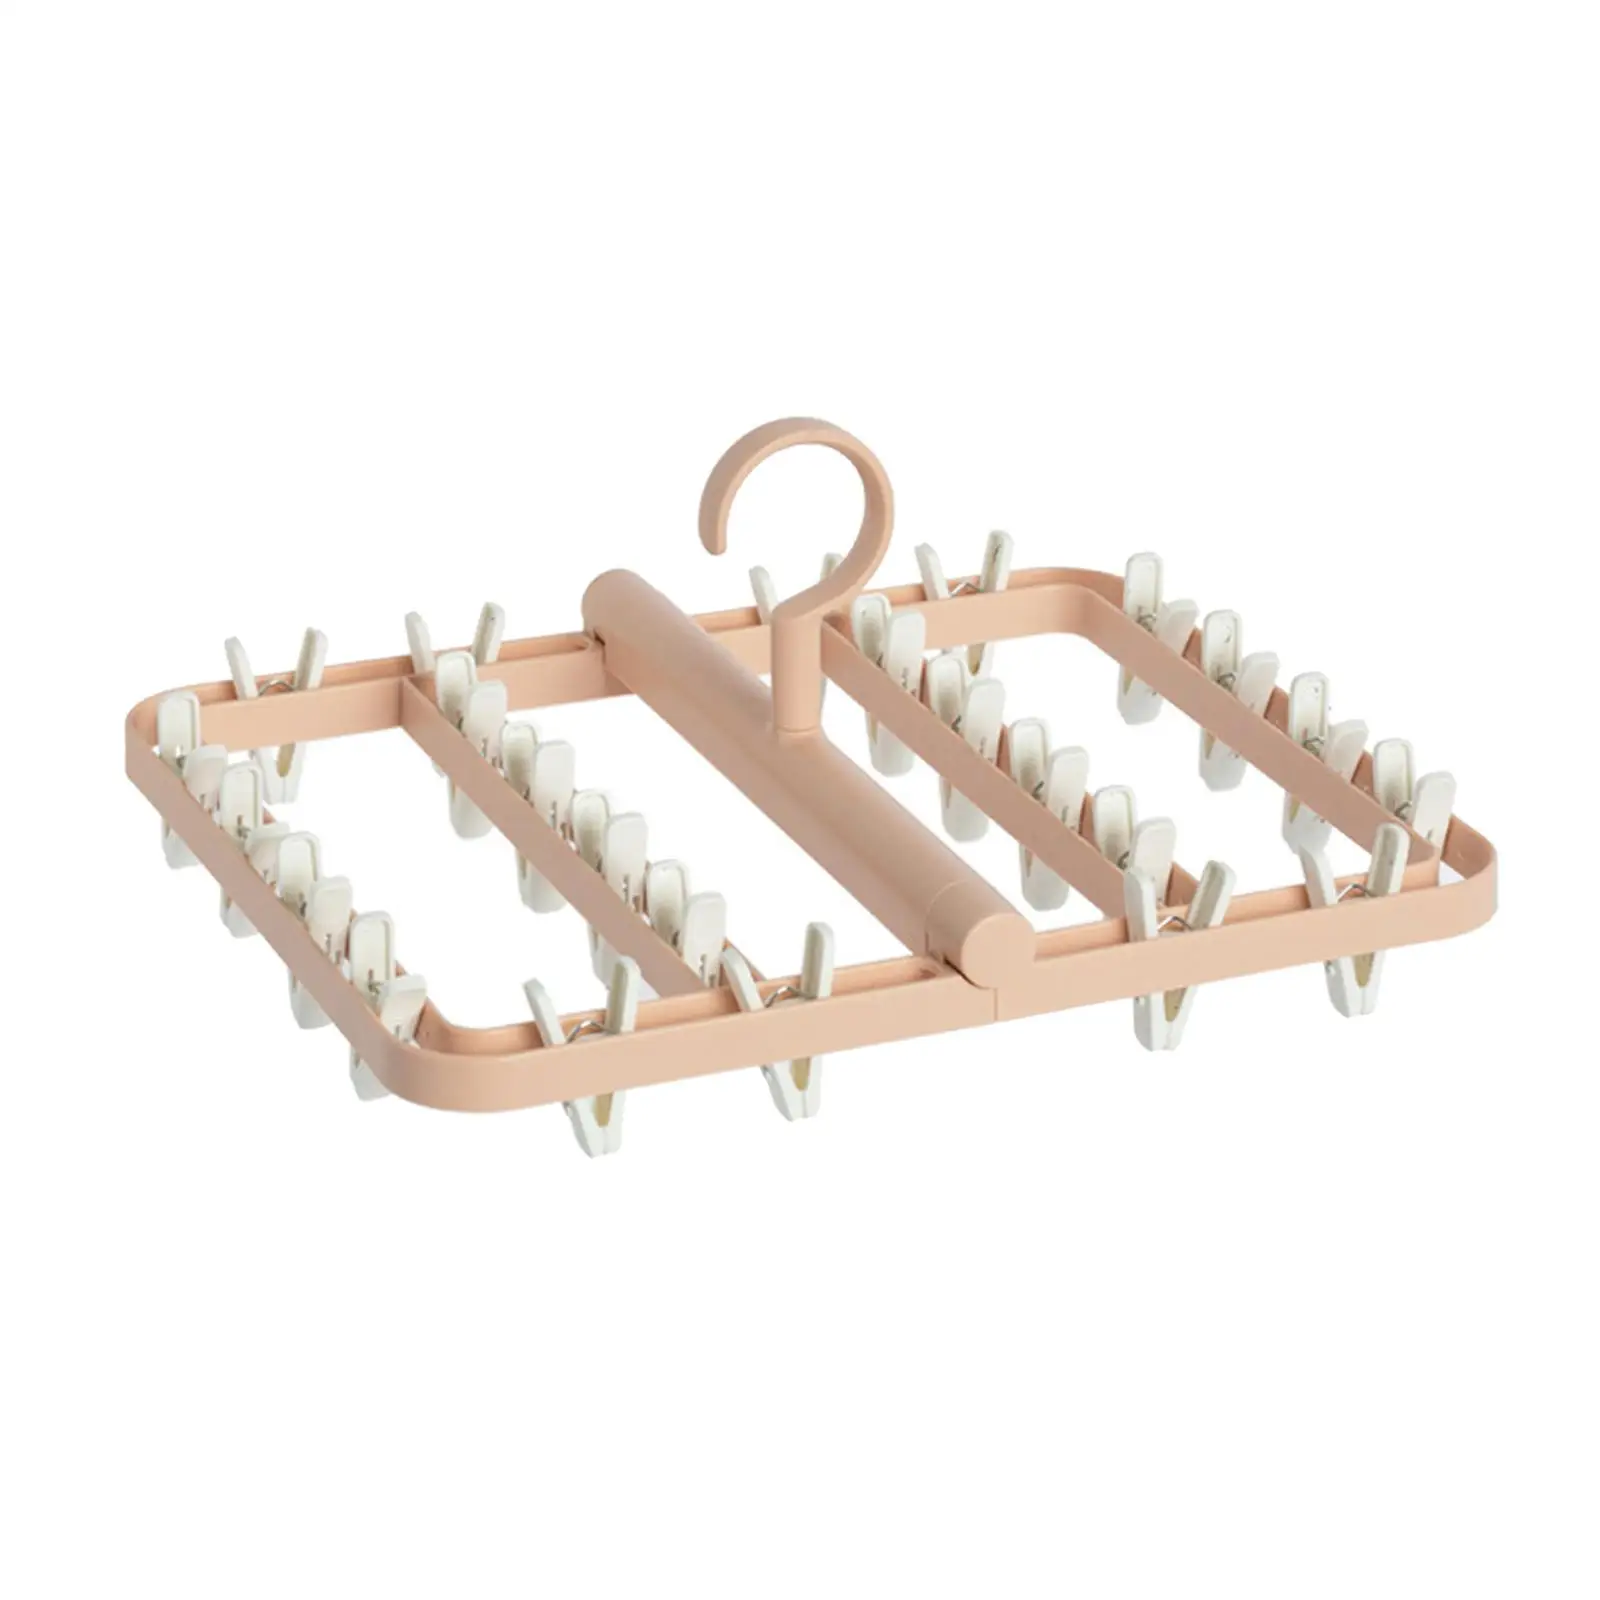 Foldable Socks Cloth Hanger Home Clip Hanger Clothespin Multifunctional Hanger Collapsible Drying Rack Folding Laundry Rack Baby